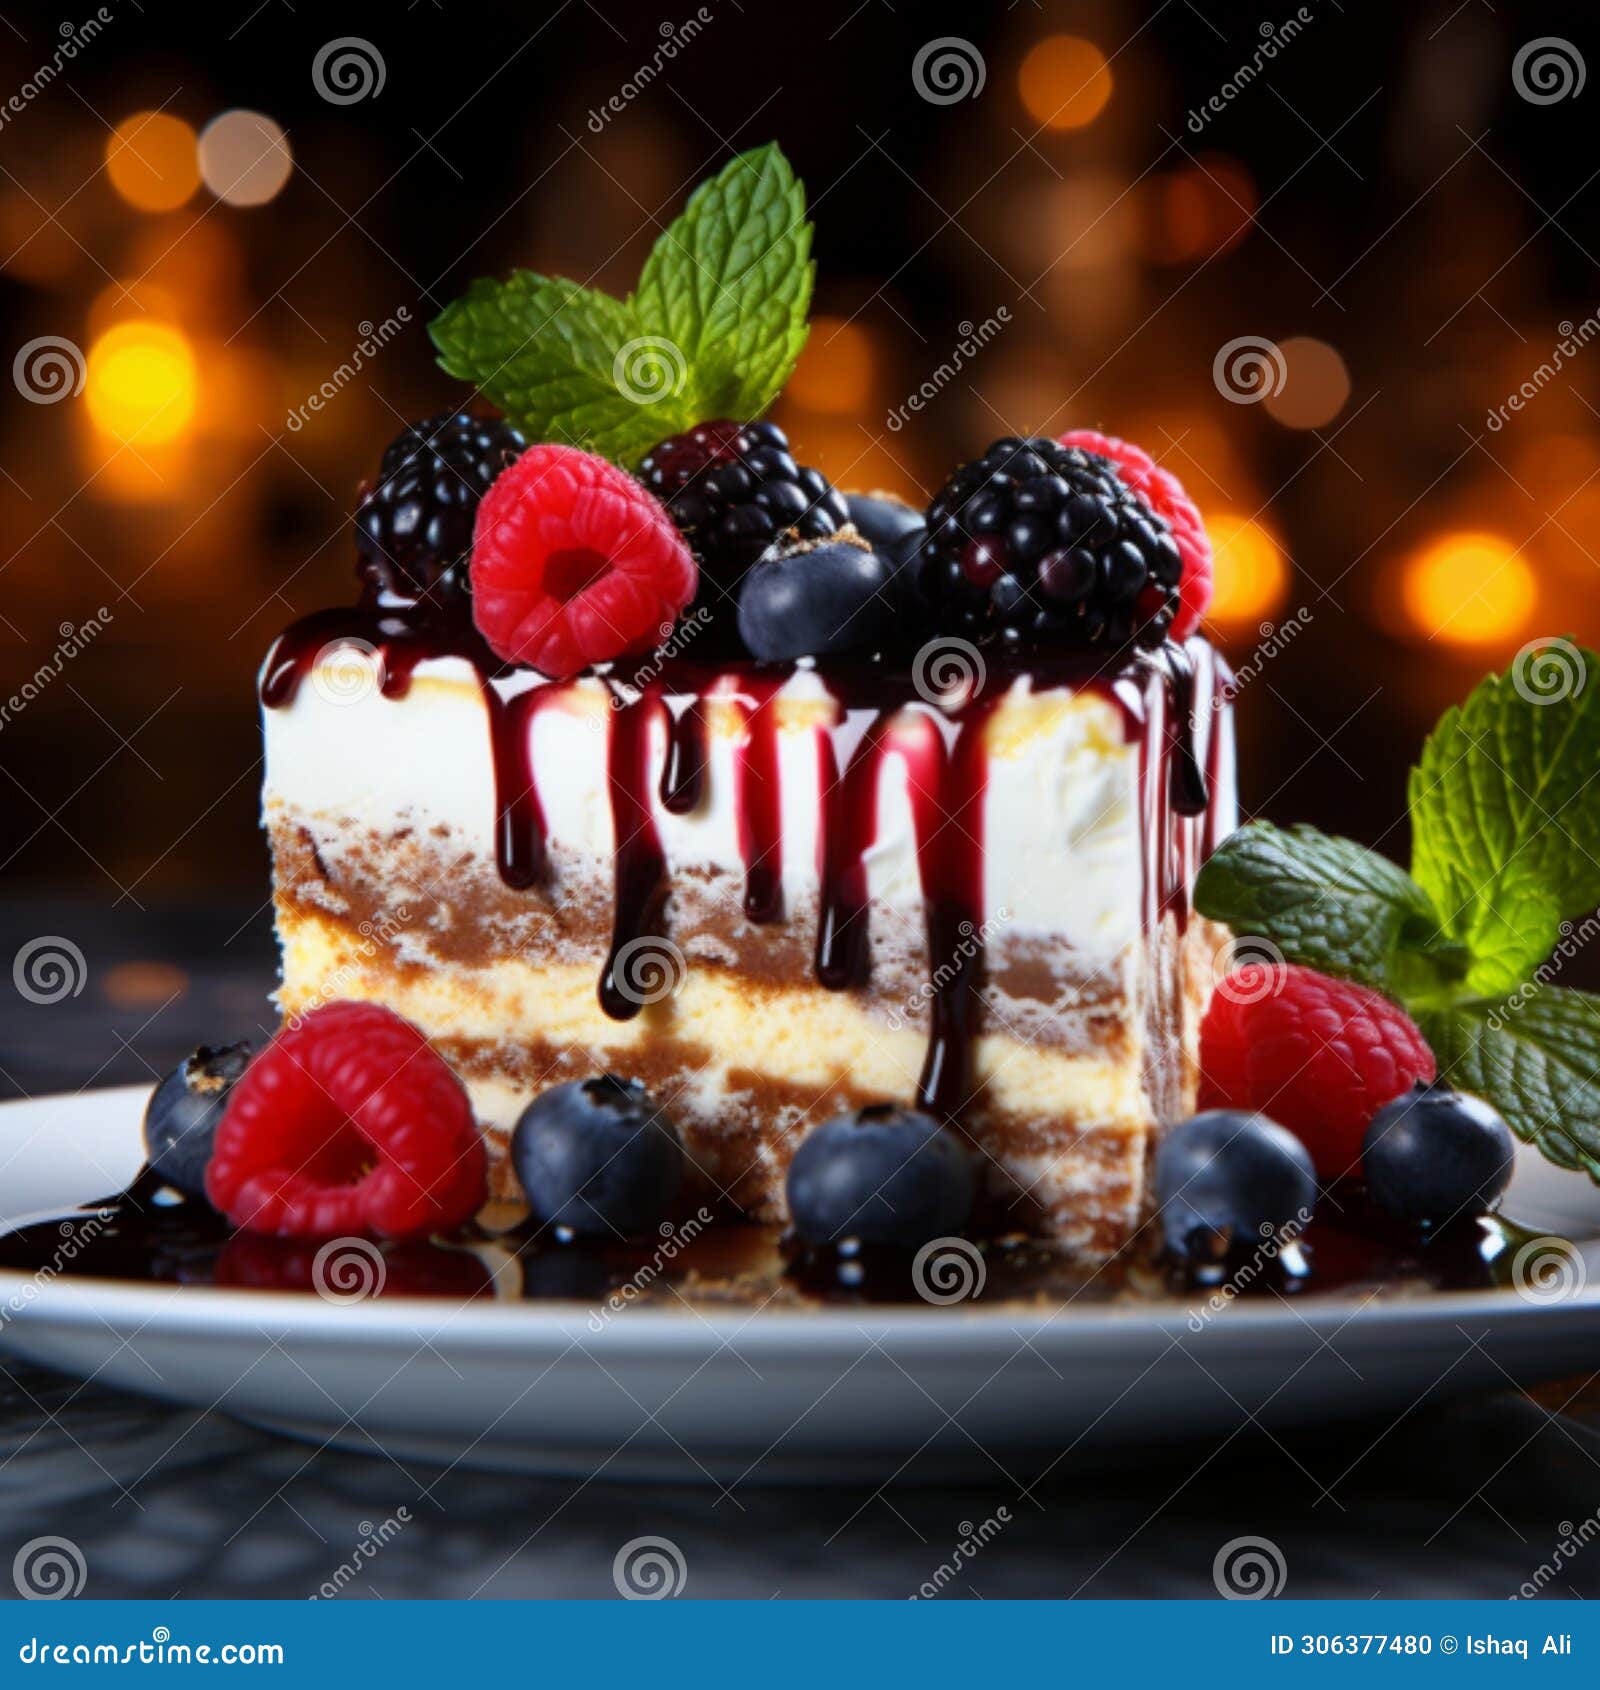 captivate your audience with a closeup of a divine dessert plated with precision